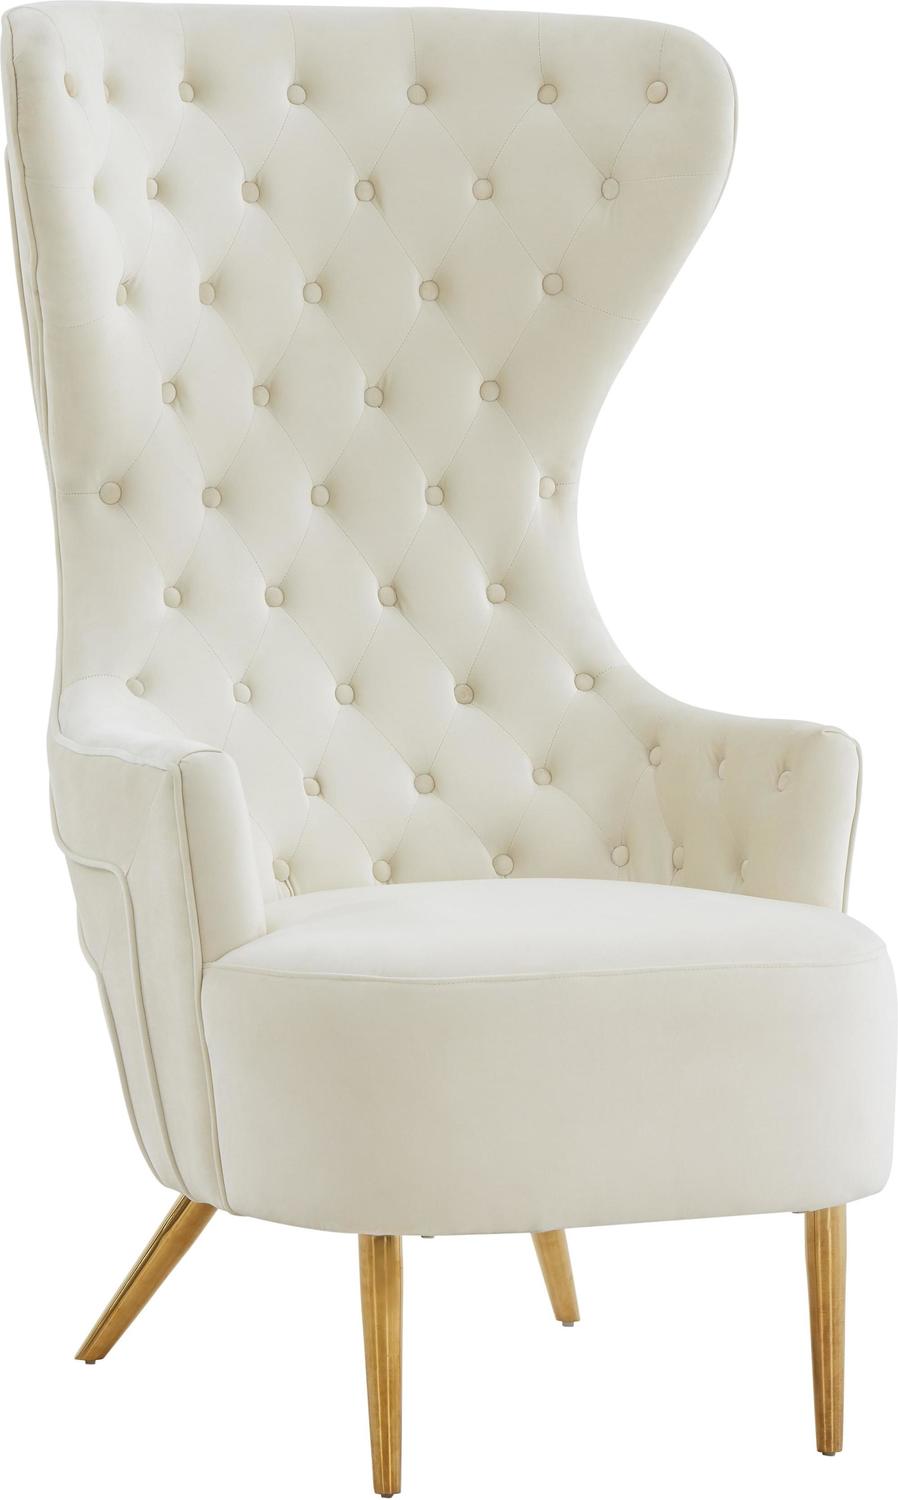  Contemporary Design Furniture Accent Chairs Chairs Cream